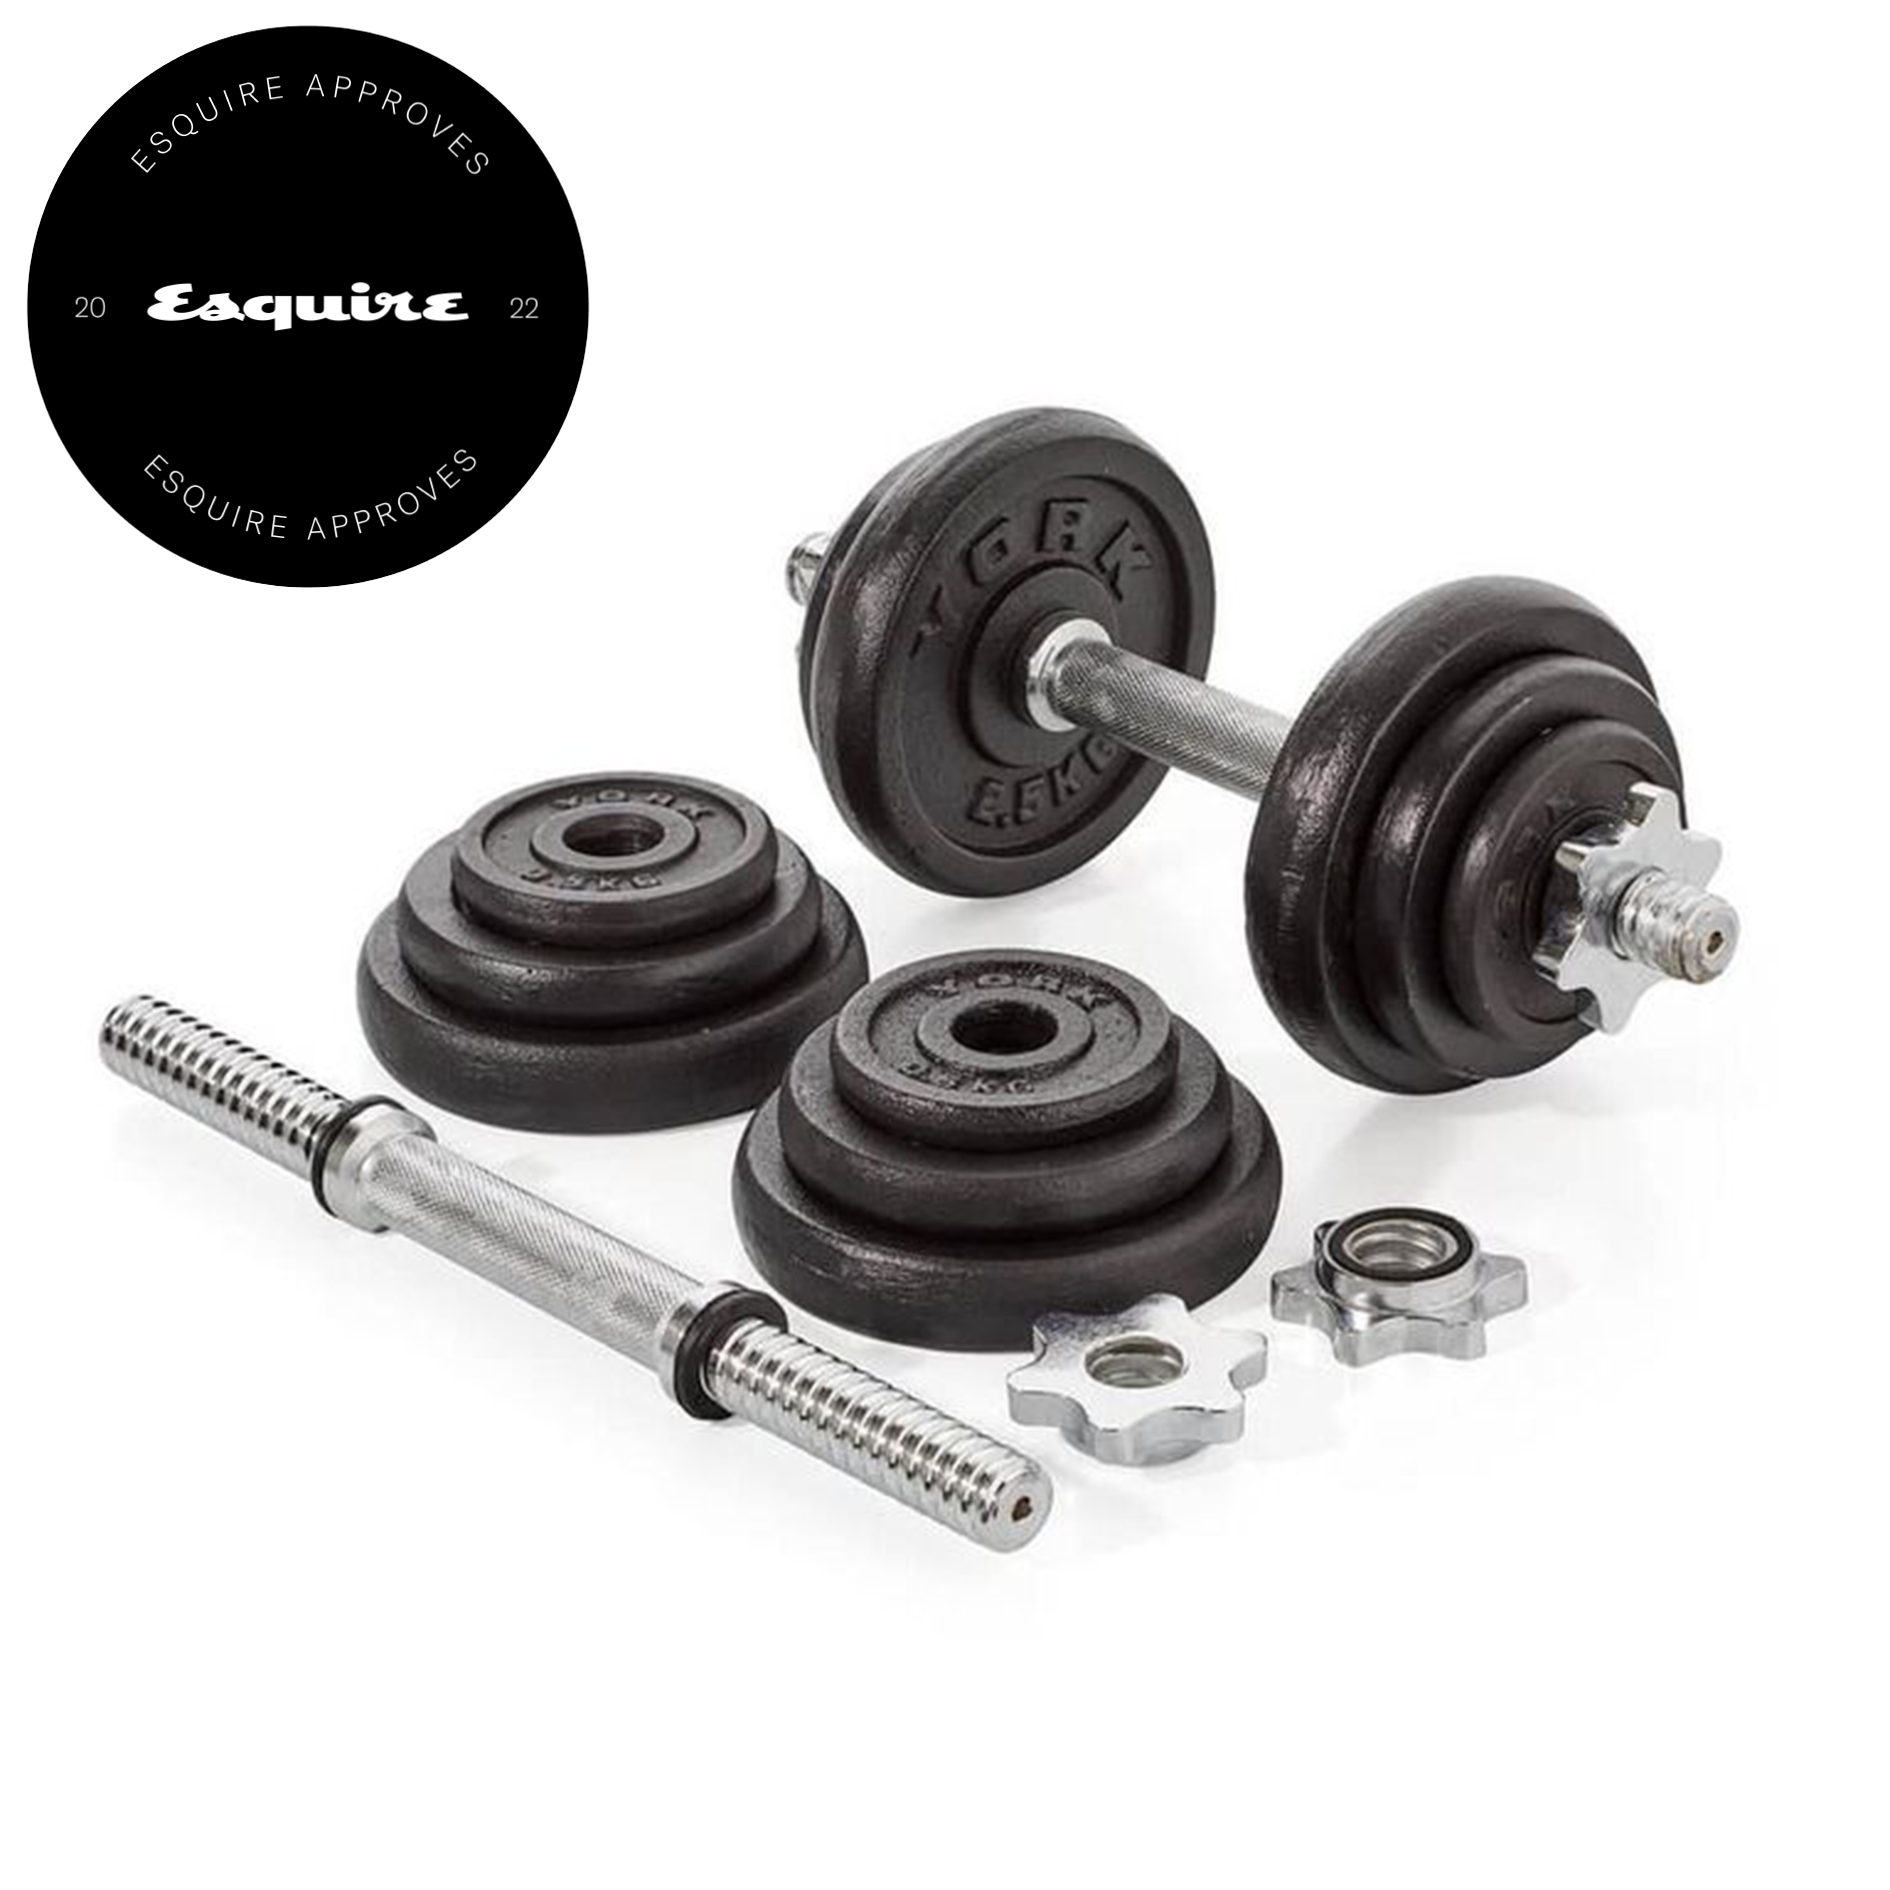 TnP Distribution 20kg Cast Iron Adjustable Dumbbell Set Hand Weight with Solid Dumbbell Handles Changed into Barbell Set Handily